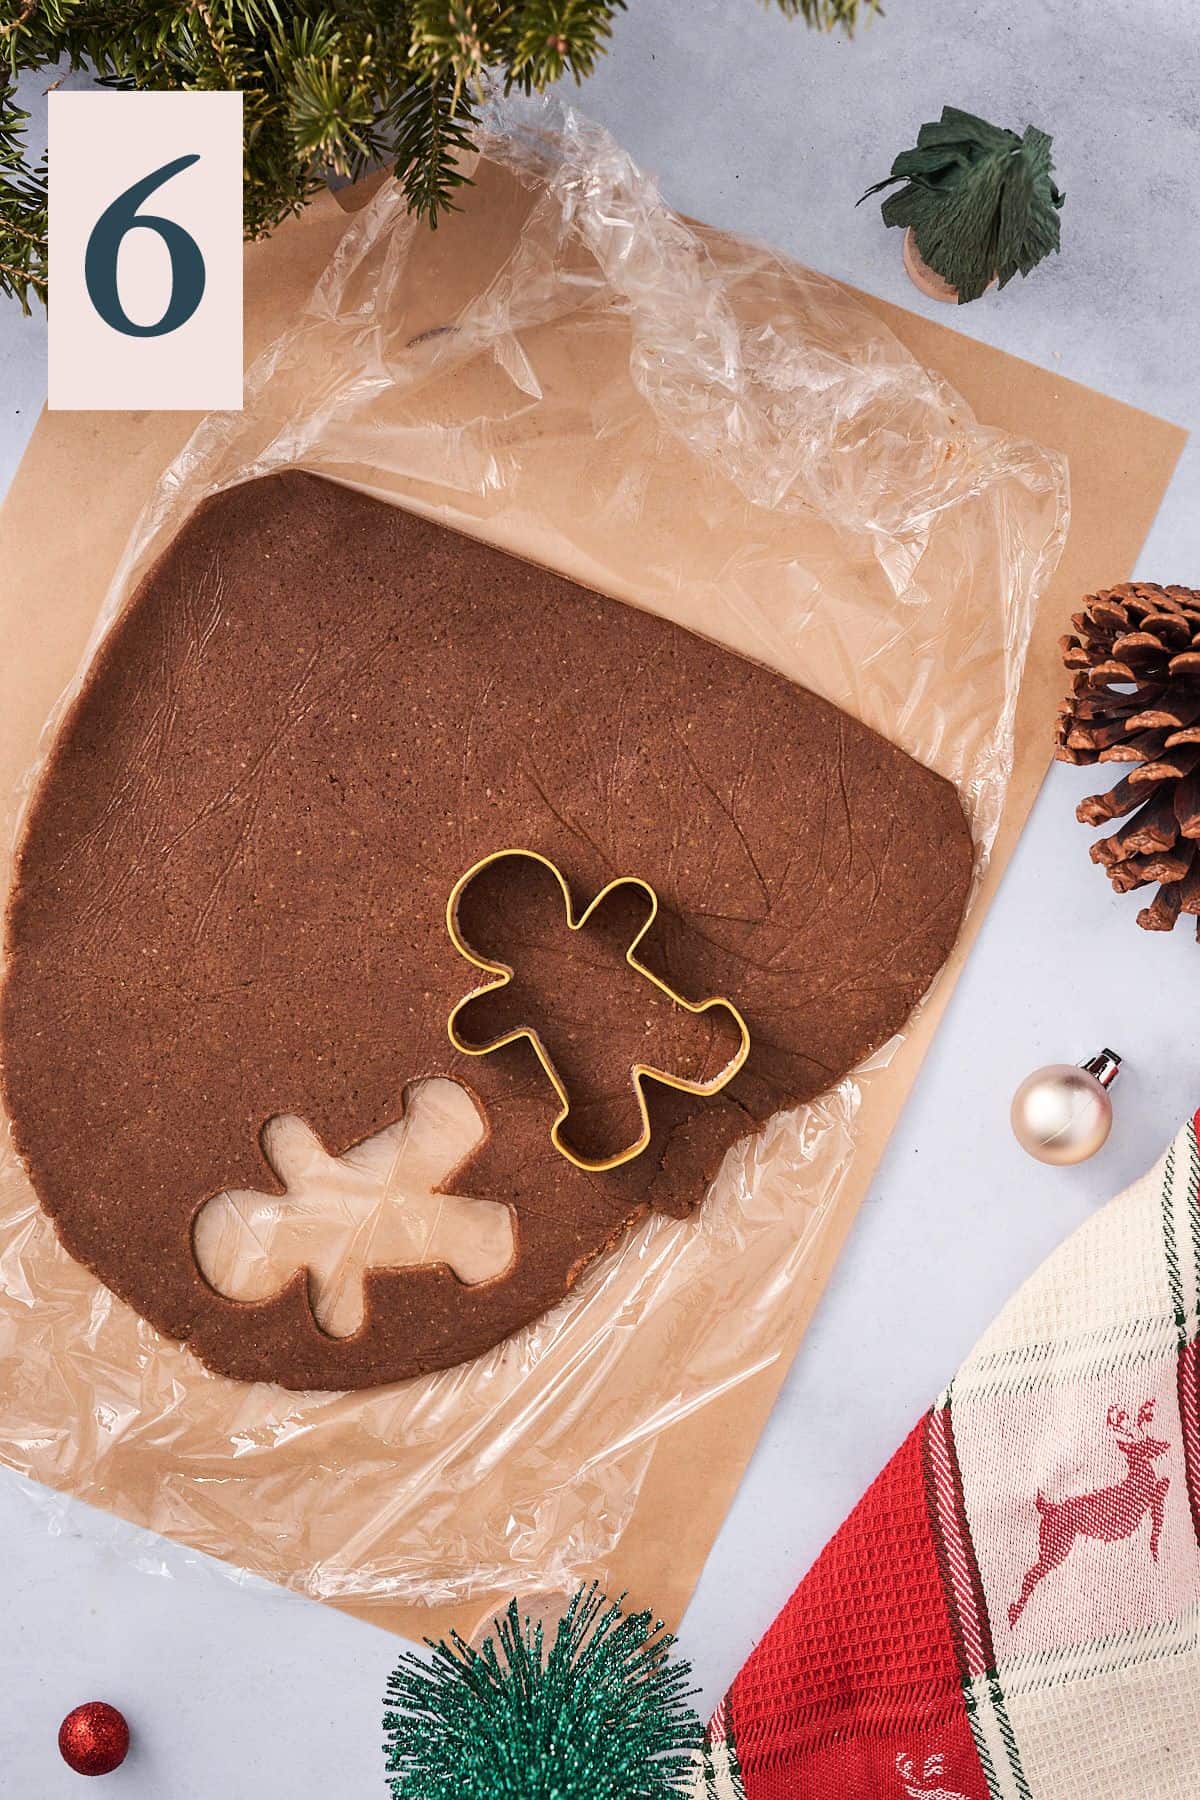 gingerbread cookie dough being cut into shapes on parchment paper.